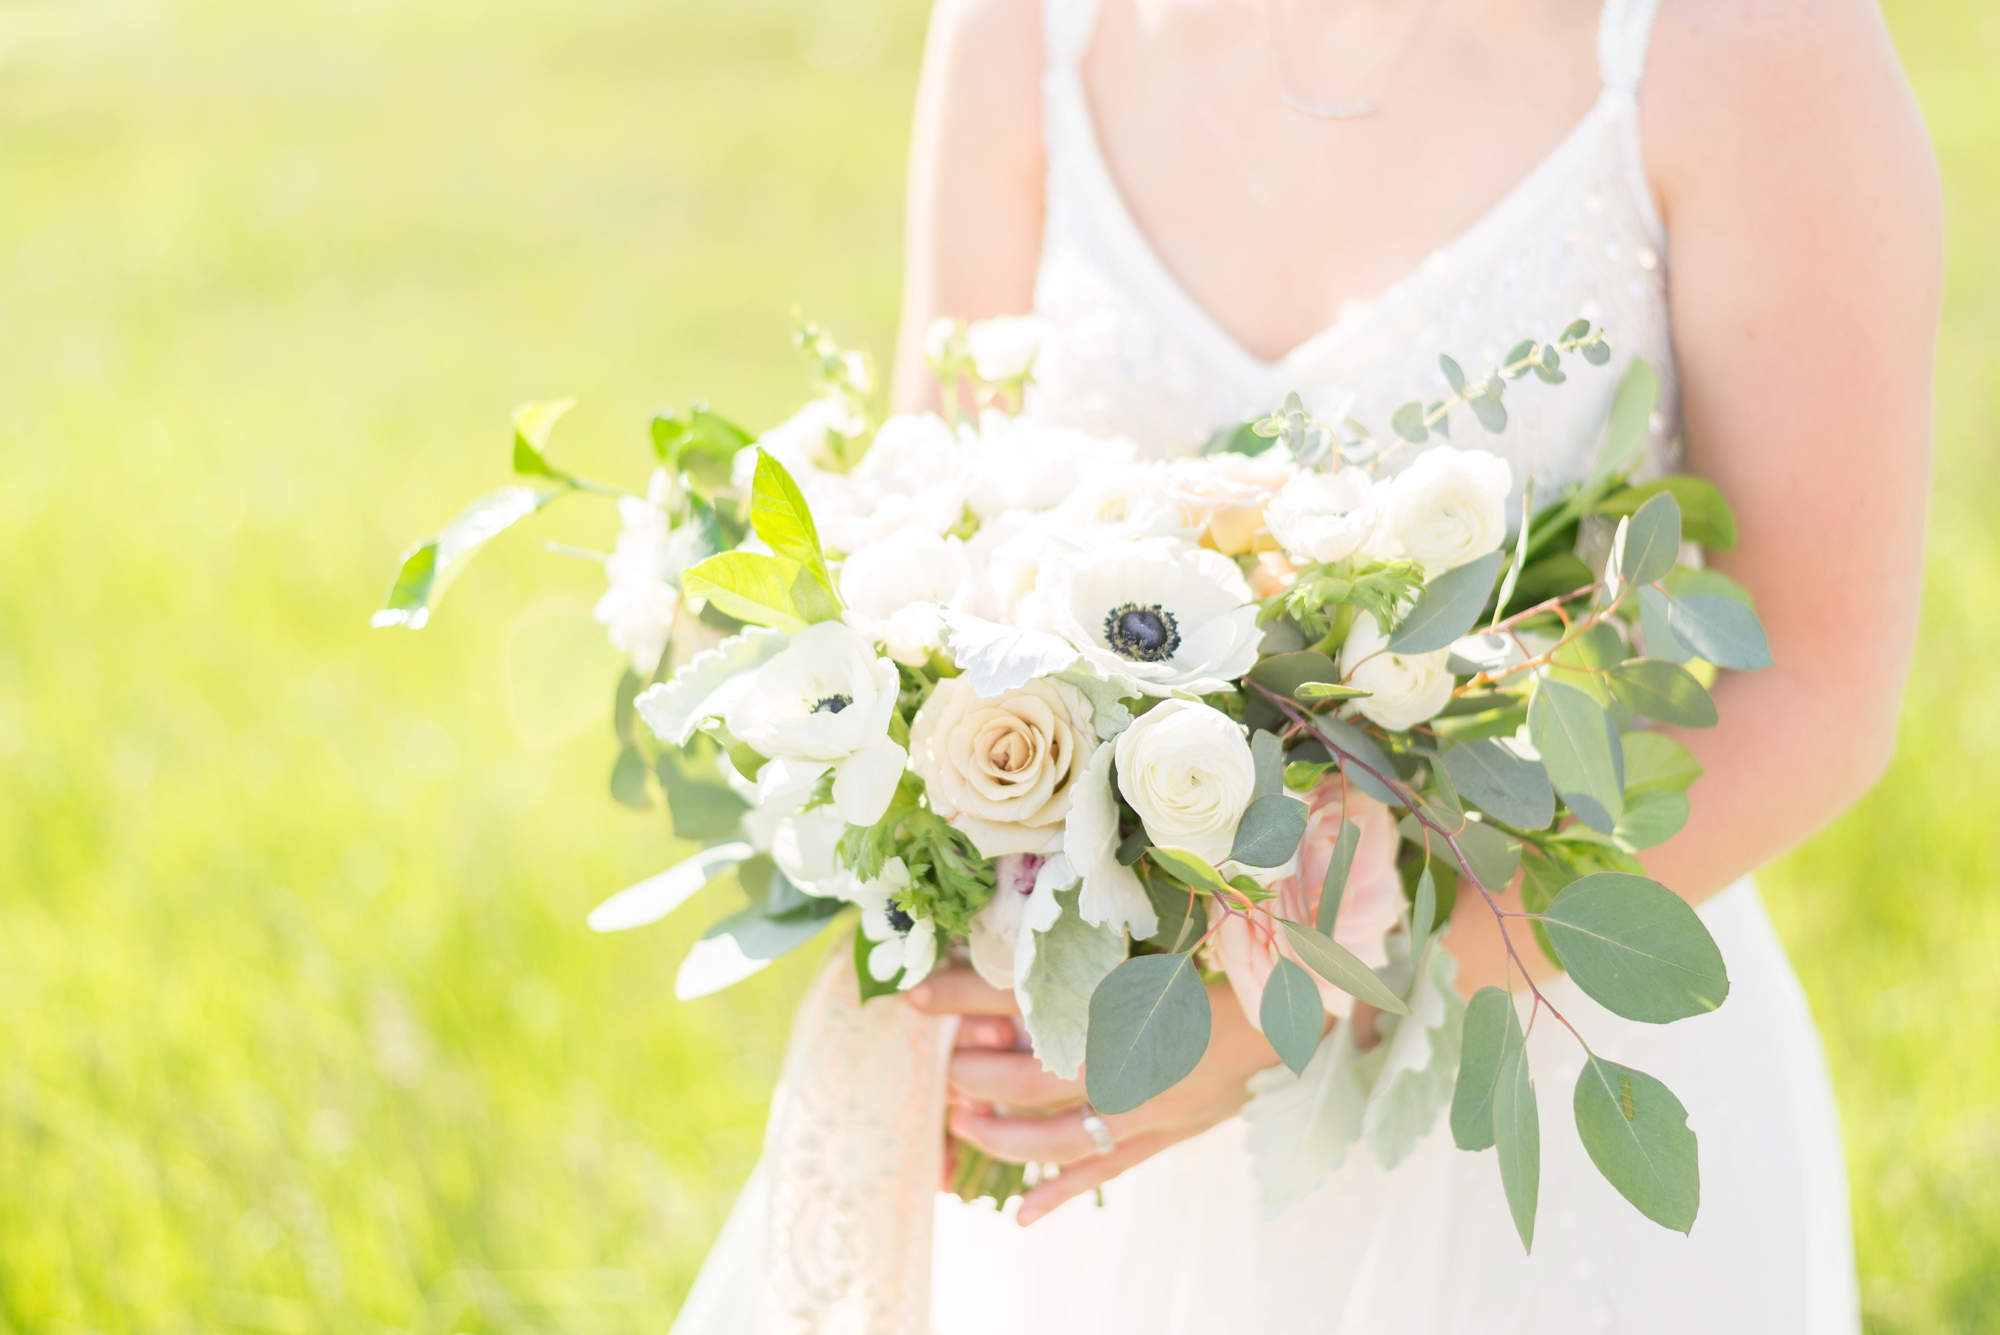 tips-on-where-to-spend-your-money-on-flowers-for-a-wedding_0469